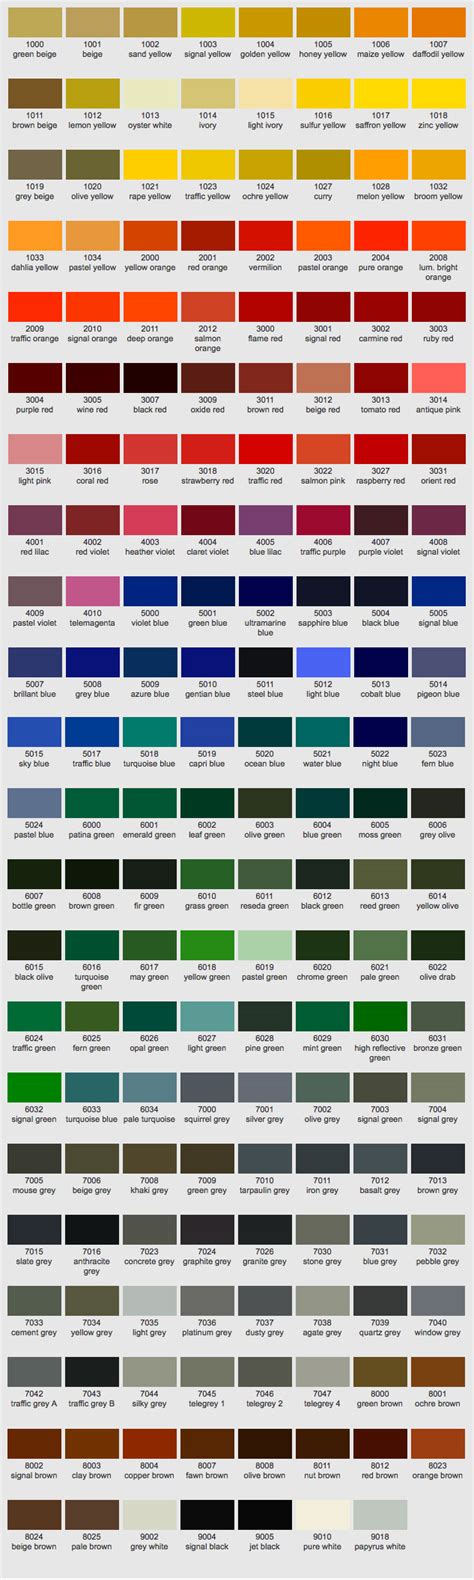 Gallery Of Ral Colour Chart Ral Color Chart Ral Colours Chart Ral